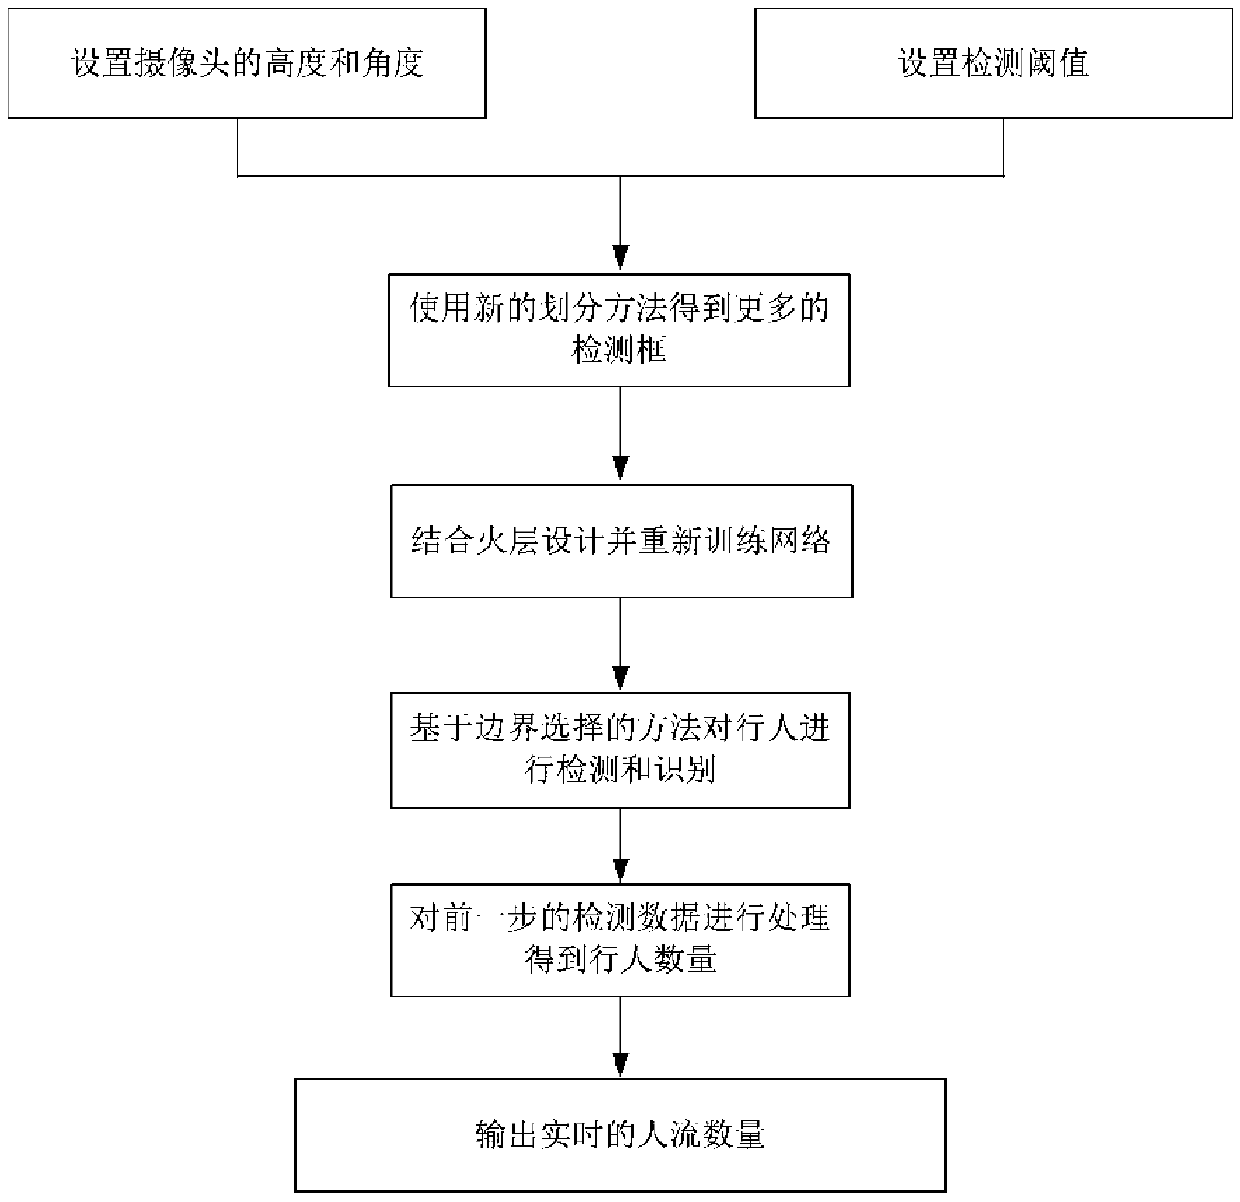 Demographic statistics device and method based on boundary selection